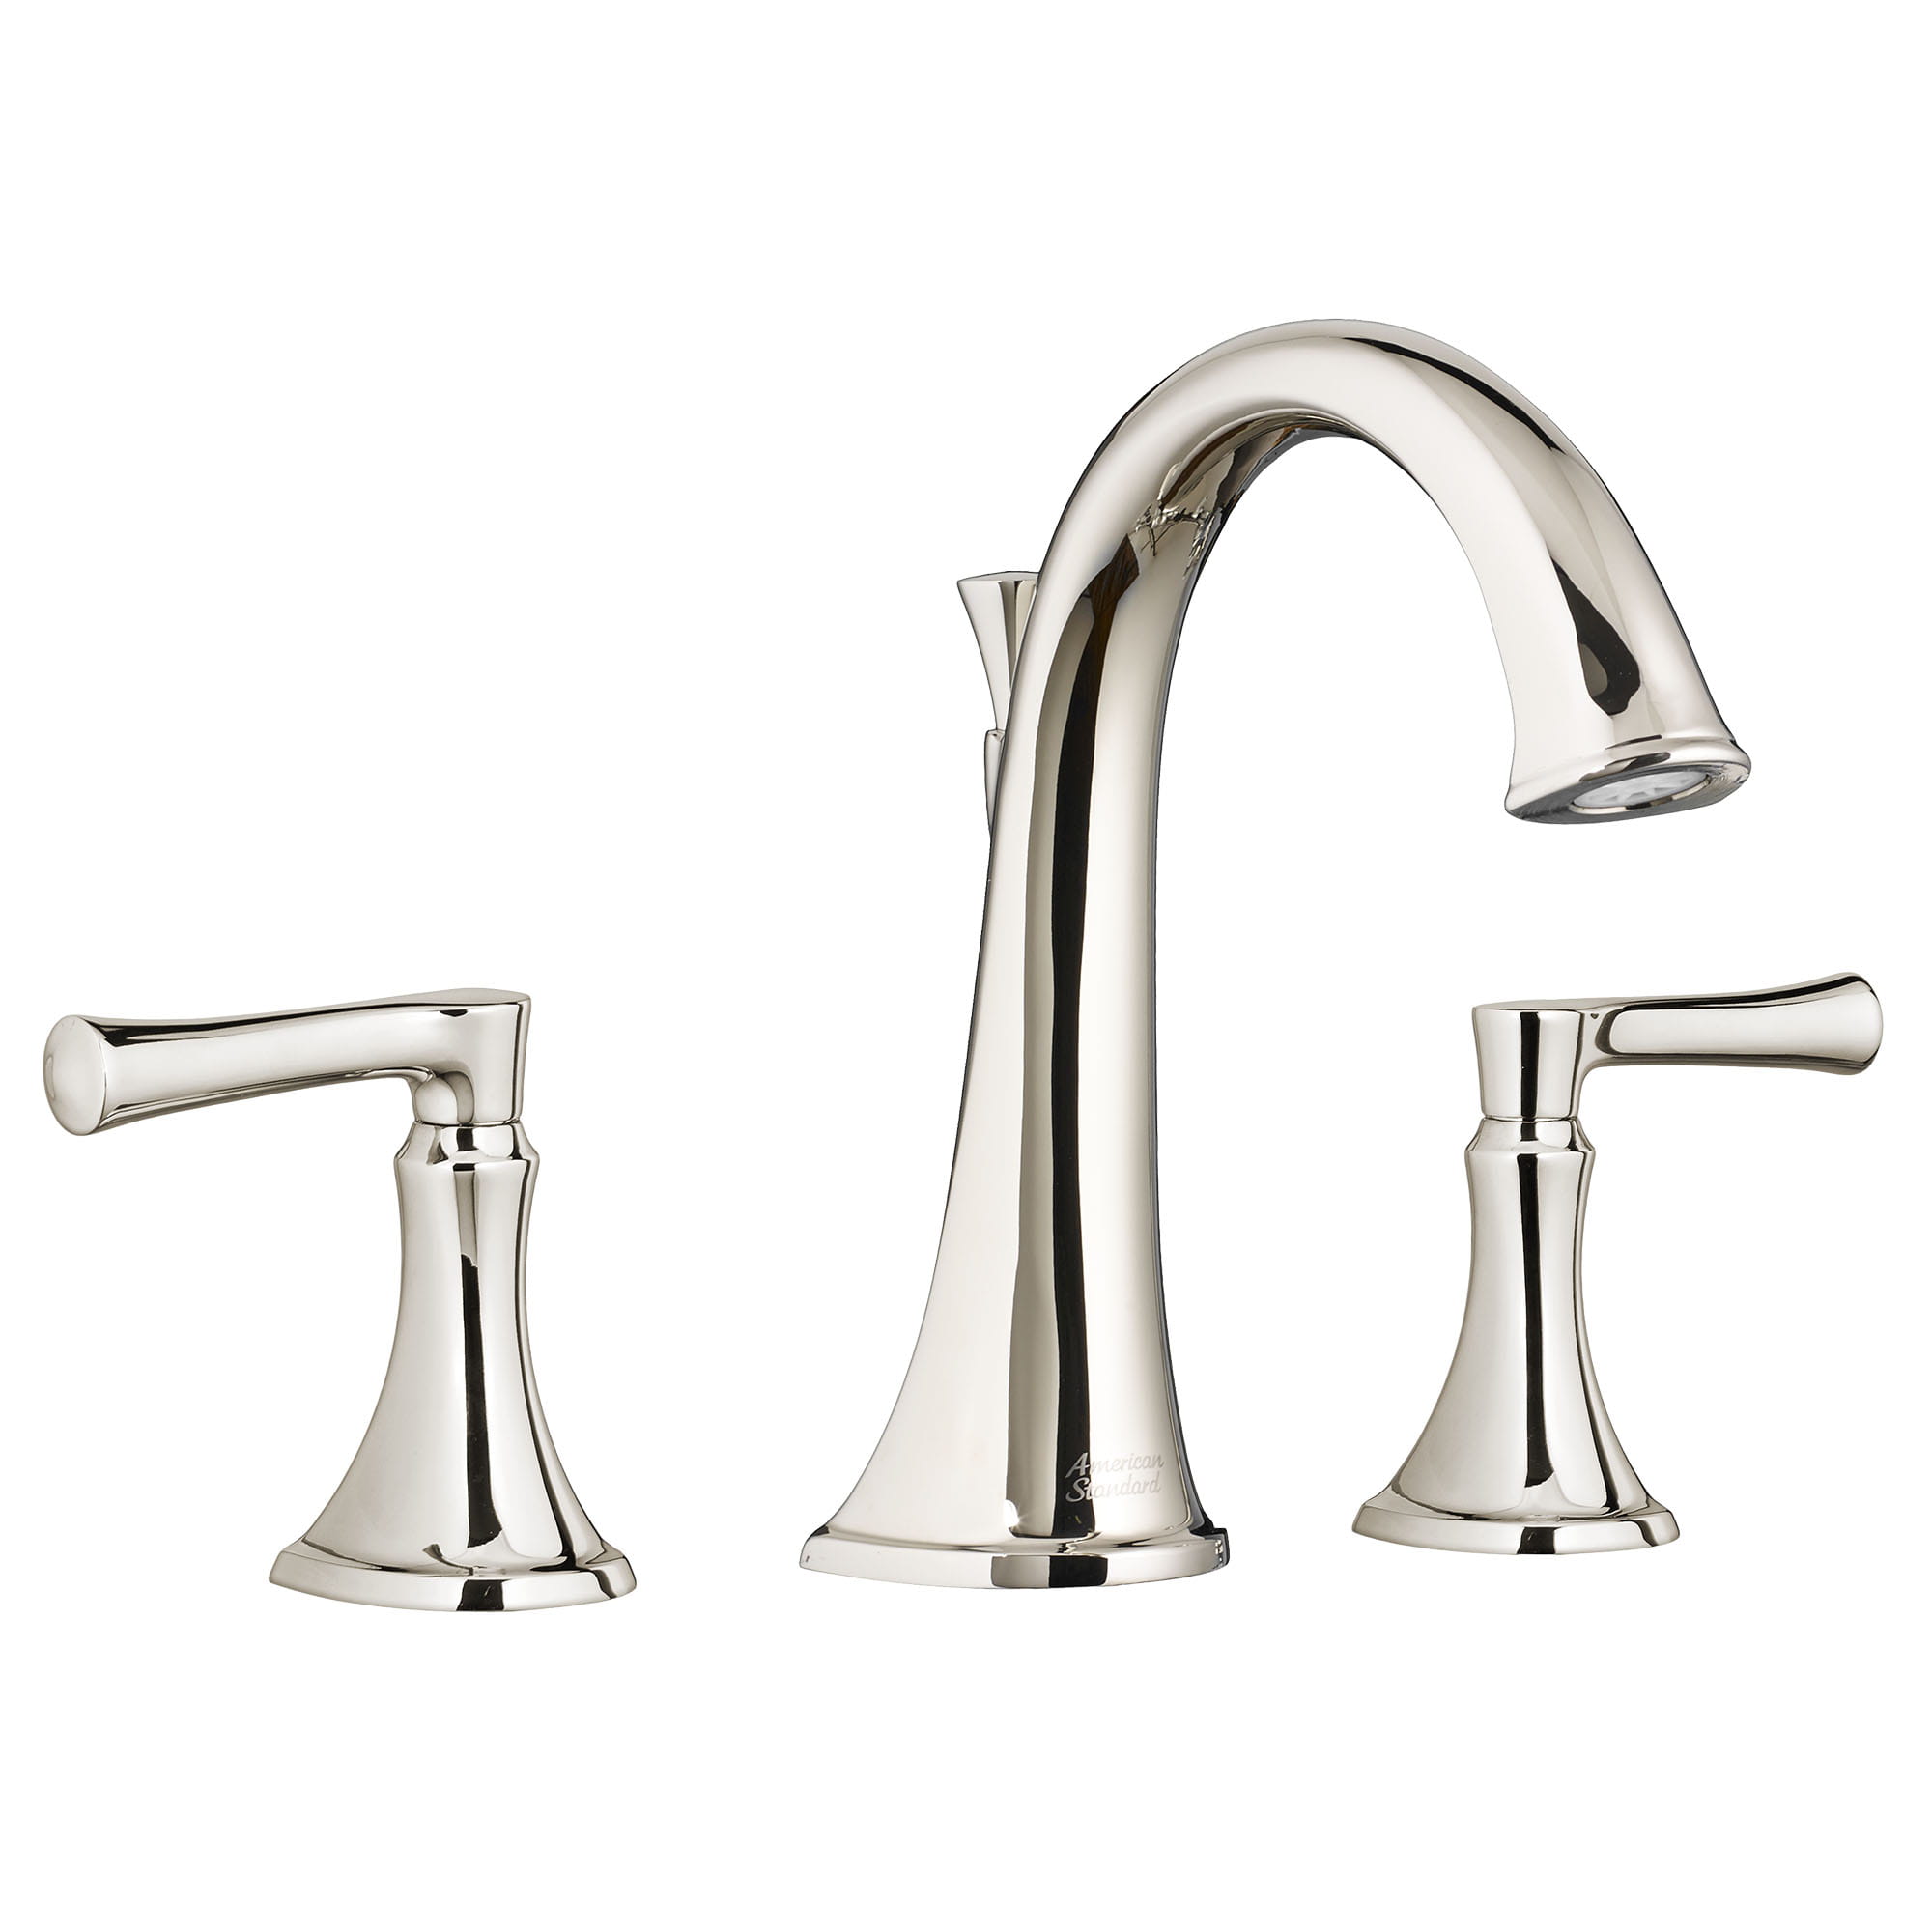 Estate Bathtub Faucet for Flash Rough-in Valve with Lever Handles